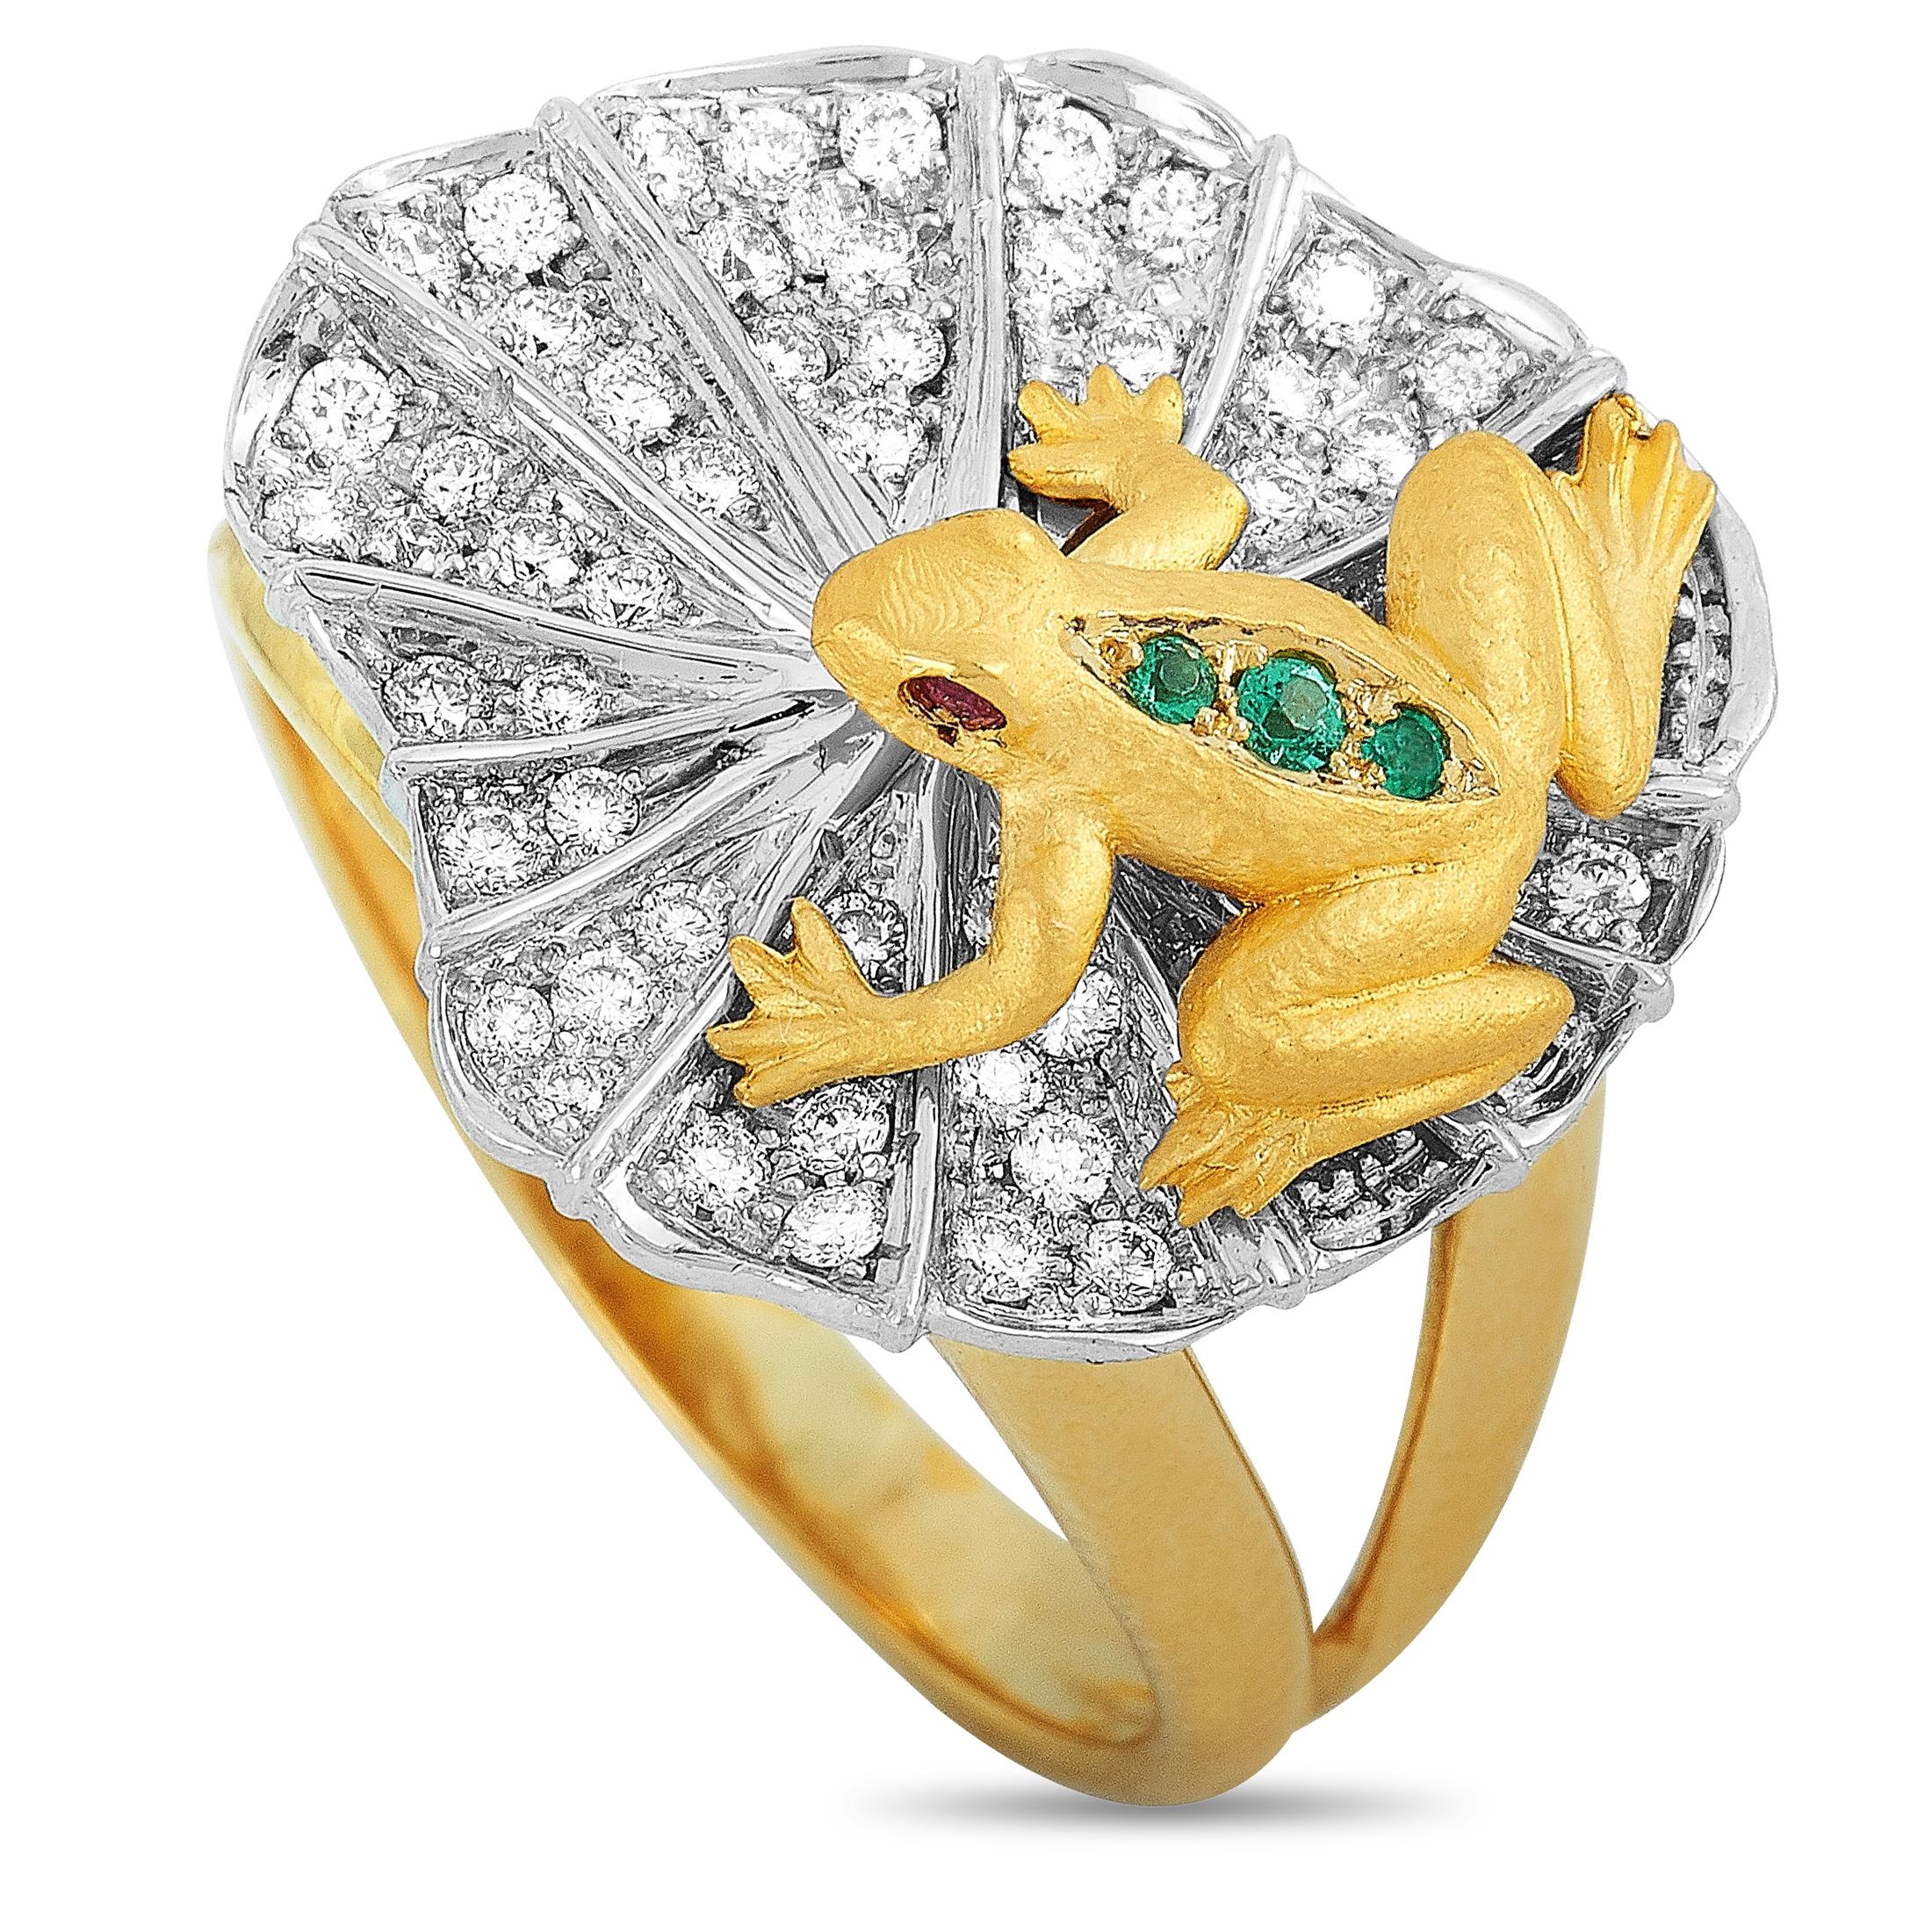 The Carrera y Carrera “Mi Musa Hechizo Mini” ring is made out of 18K yellow and white gold and weighs 10.97 grams, boasting band thickness of 2 mm and top height of 8 mm, while top dimensions measure 19 by 16 mm. The ring is embellished with rubies,